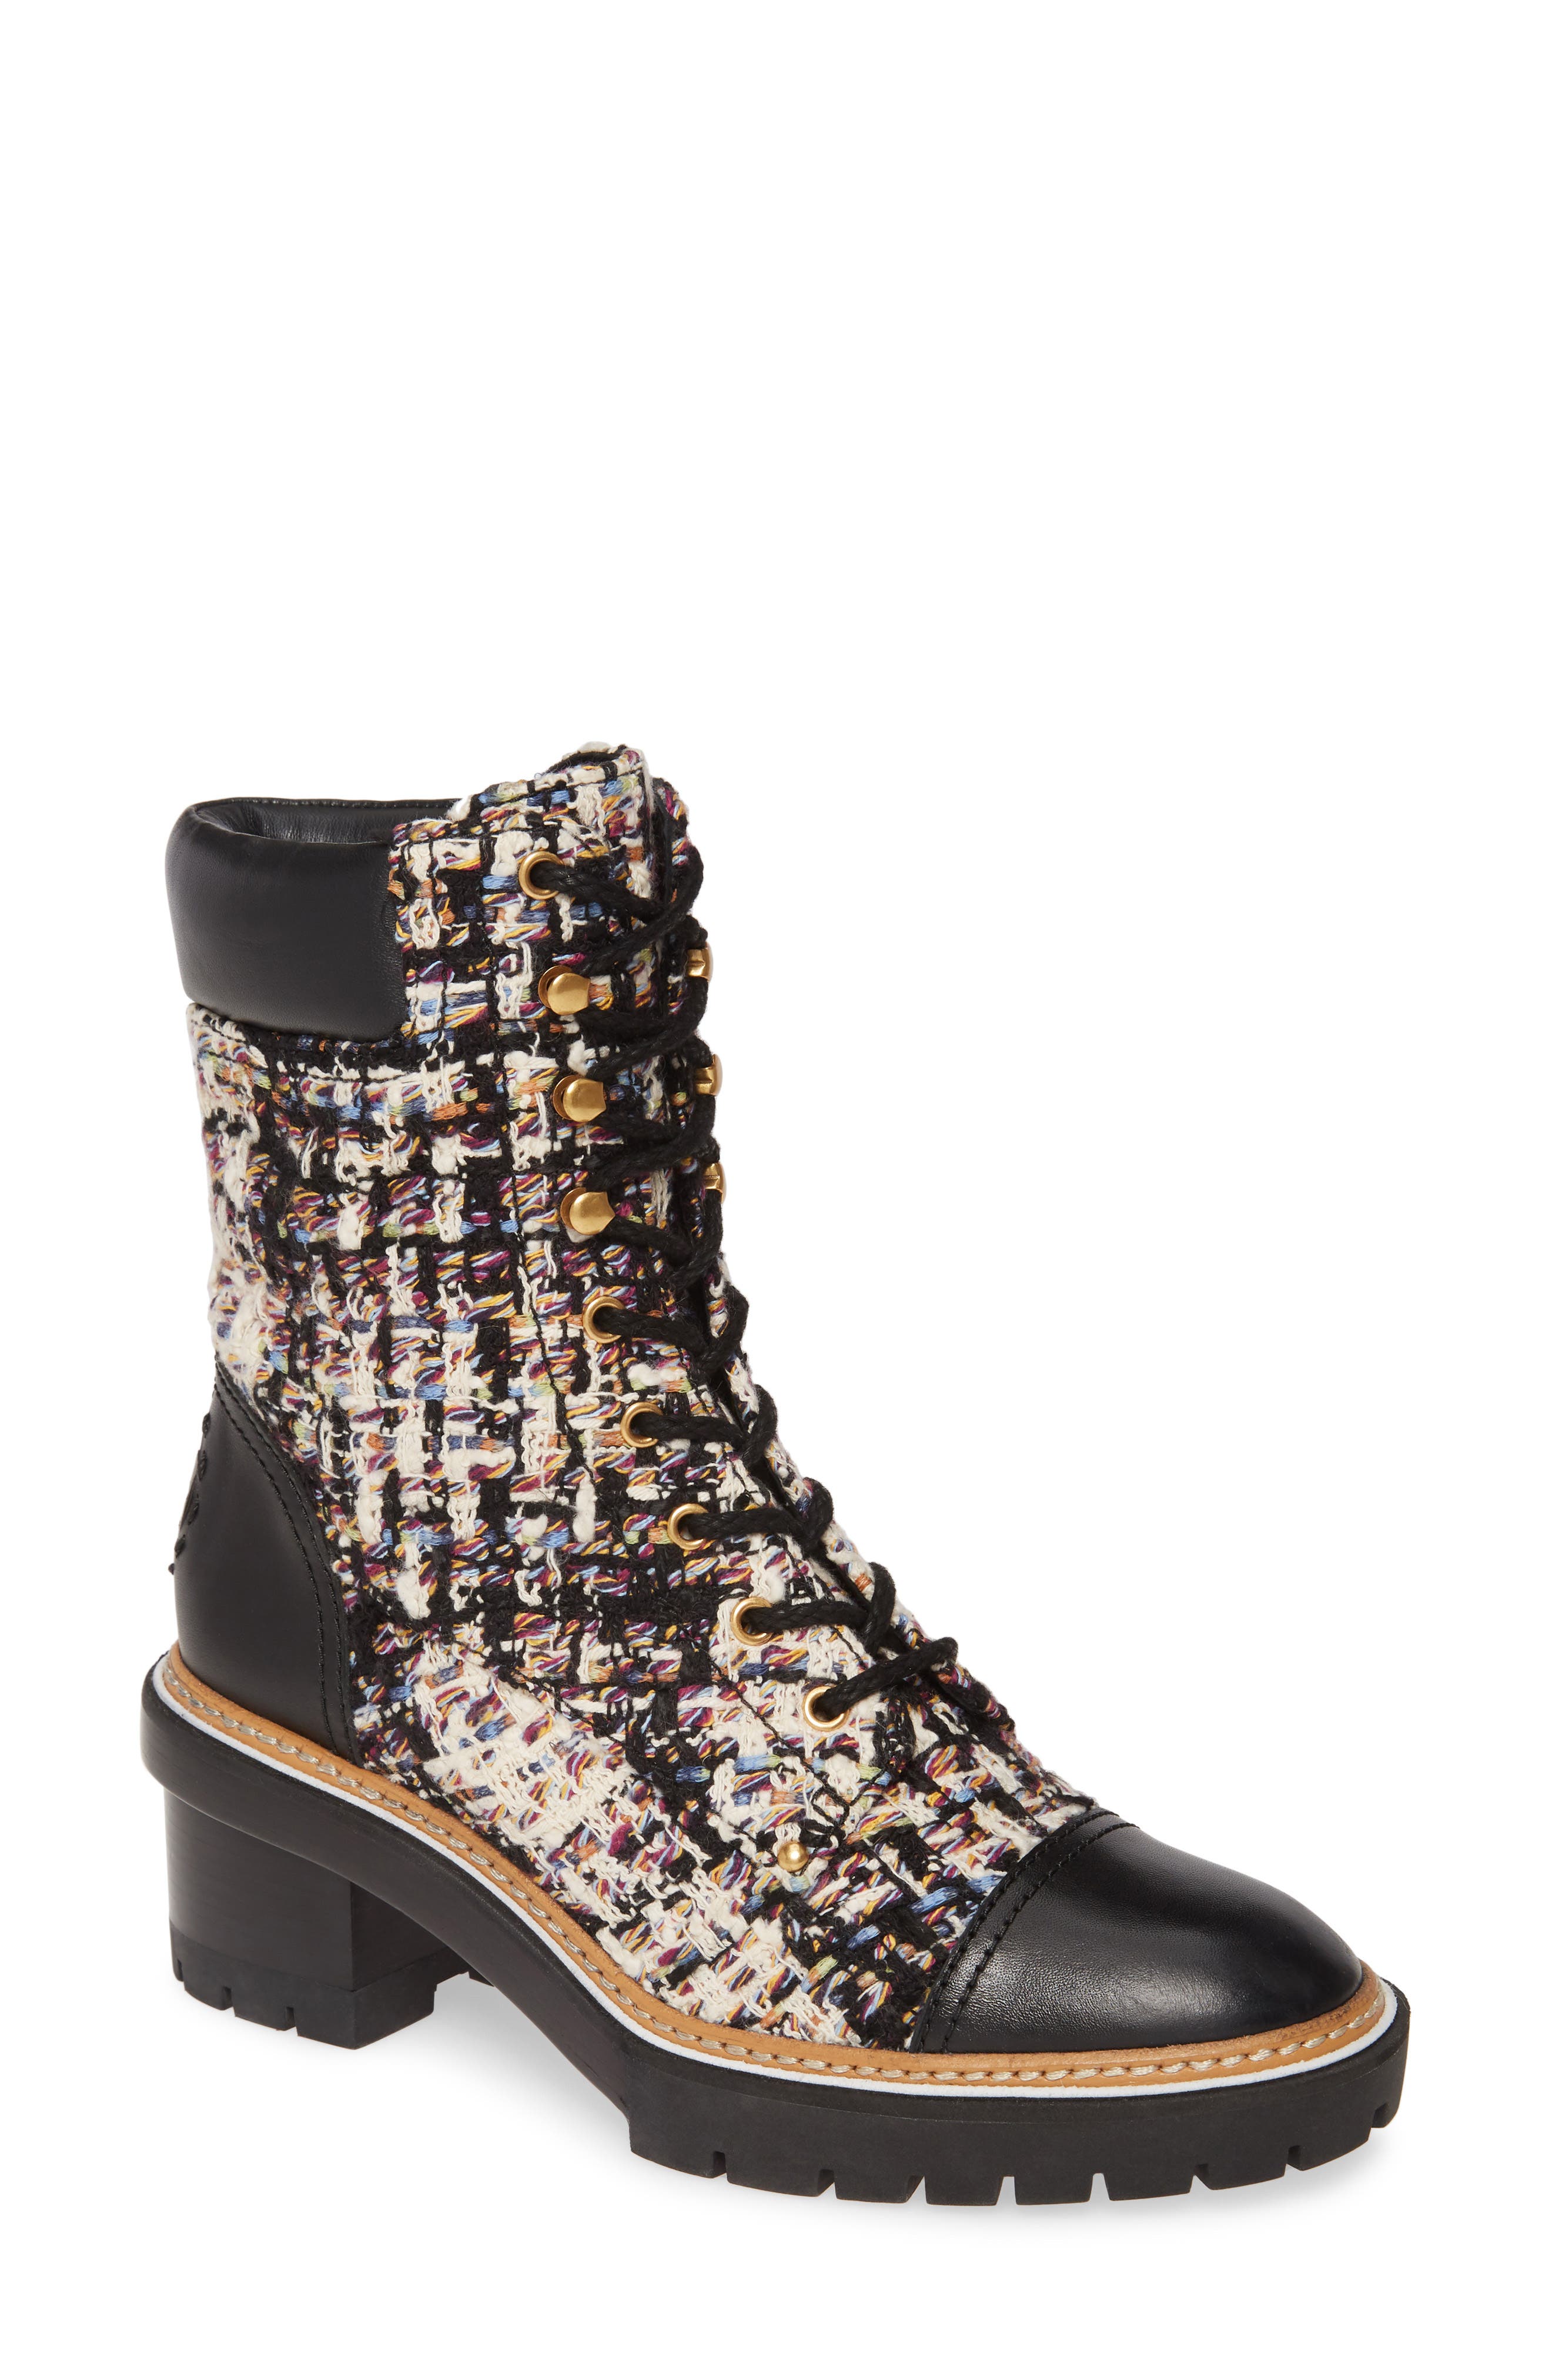 tory burch lace up boots